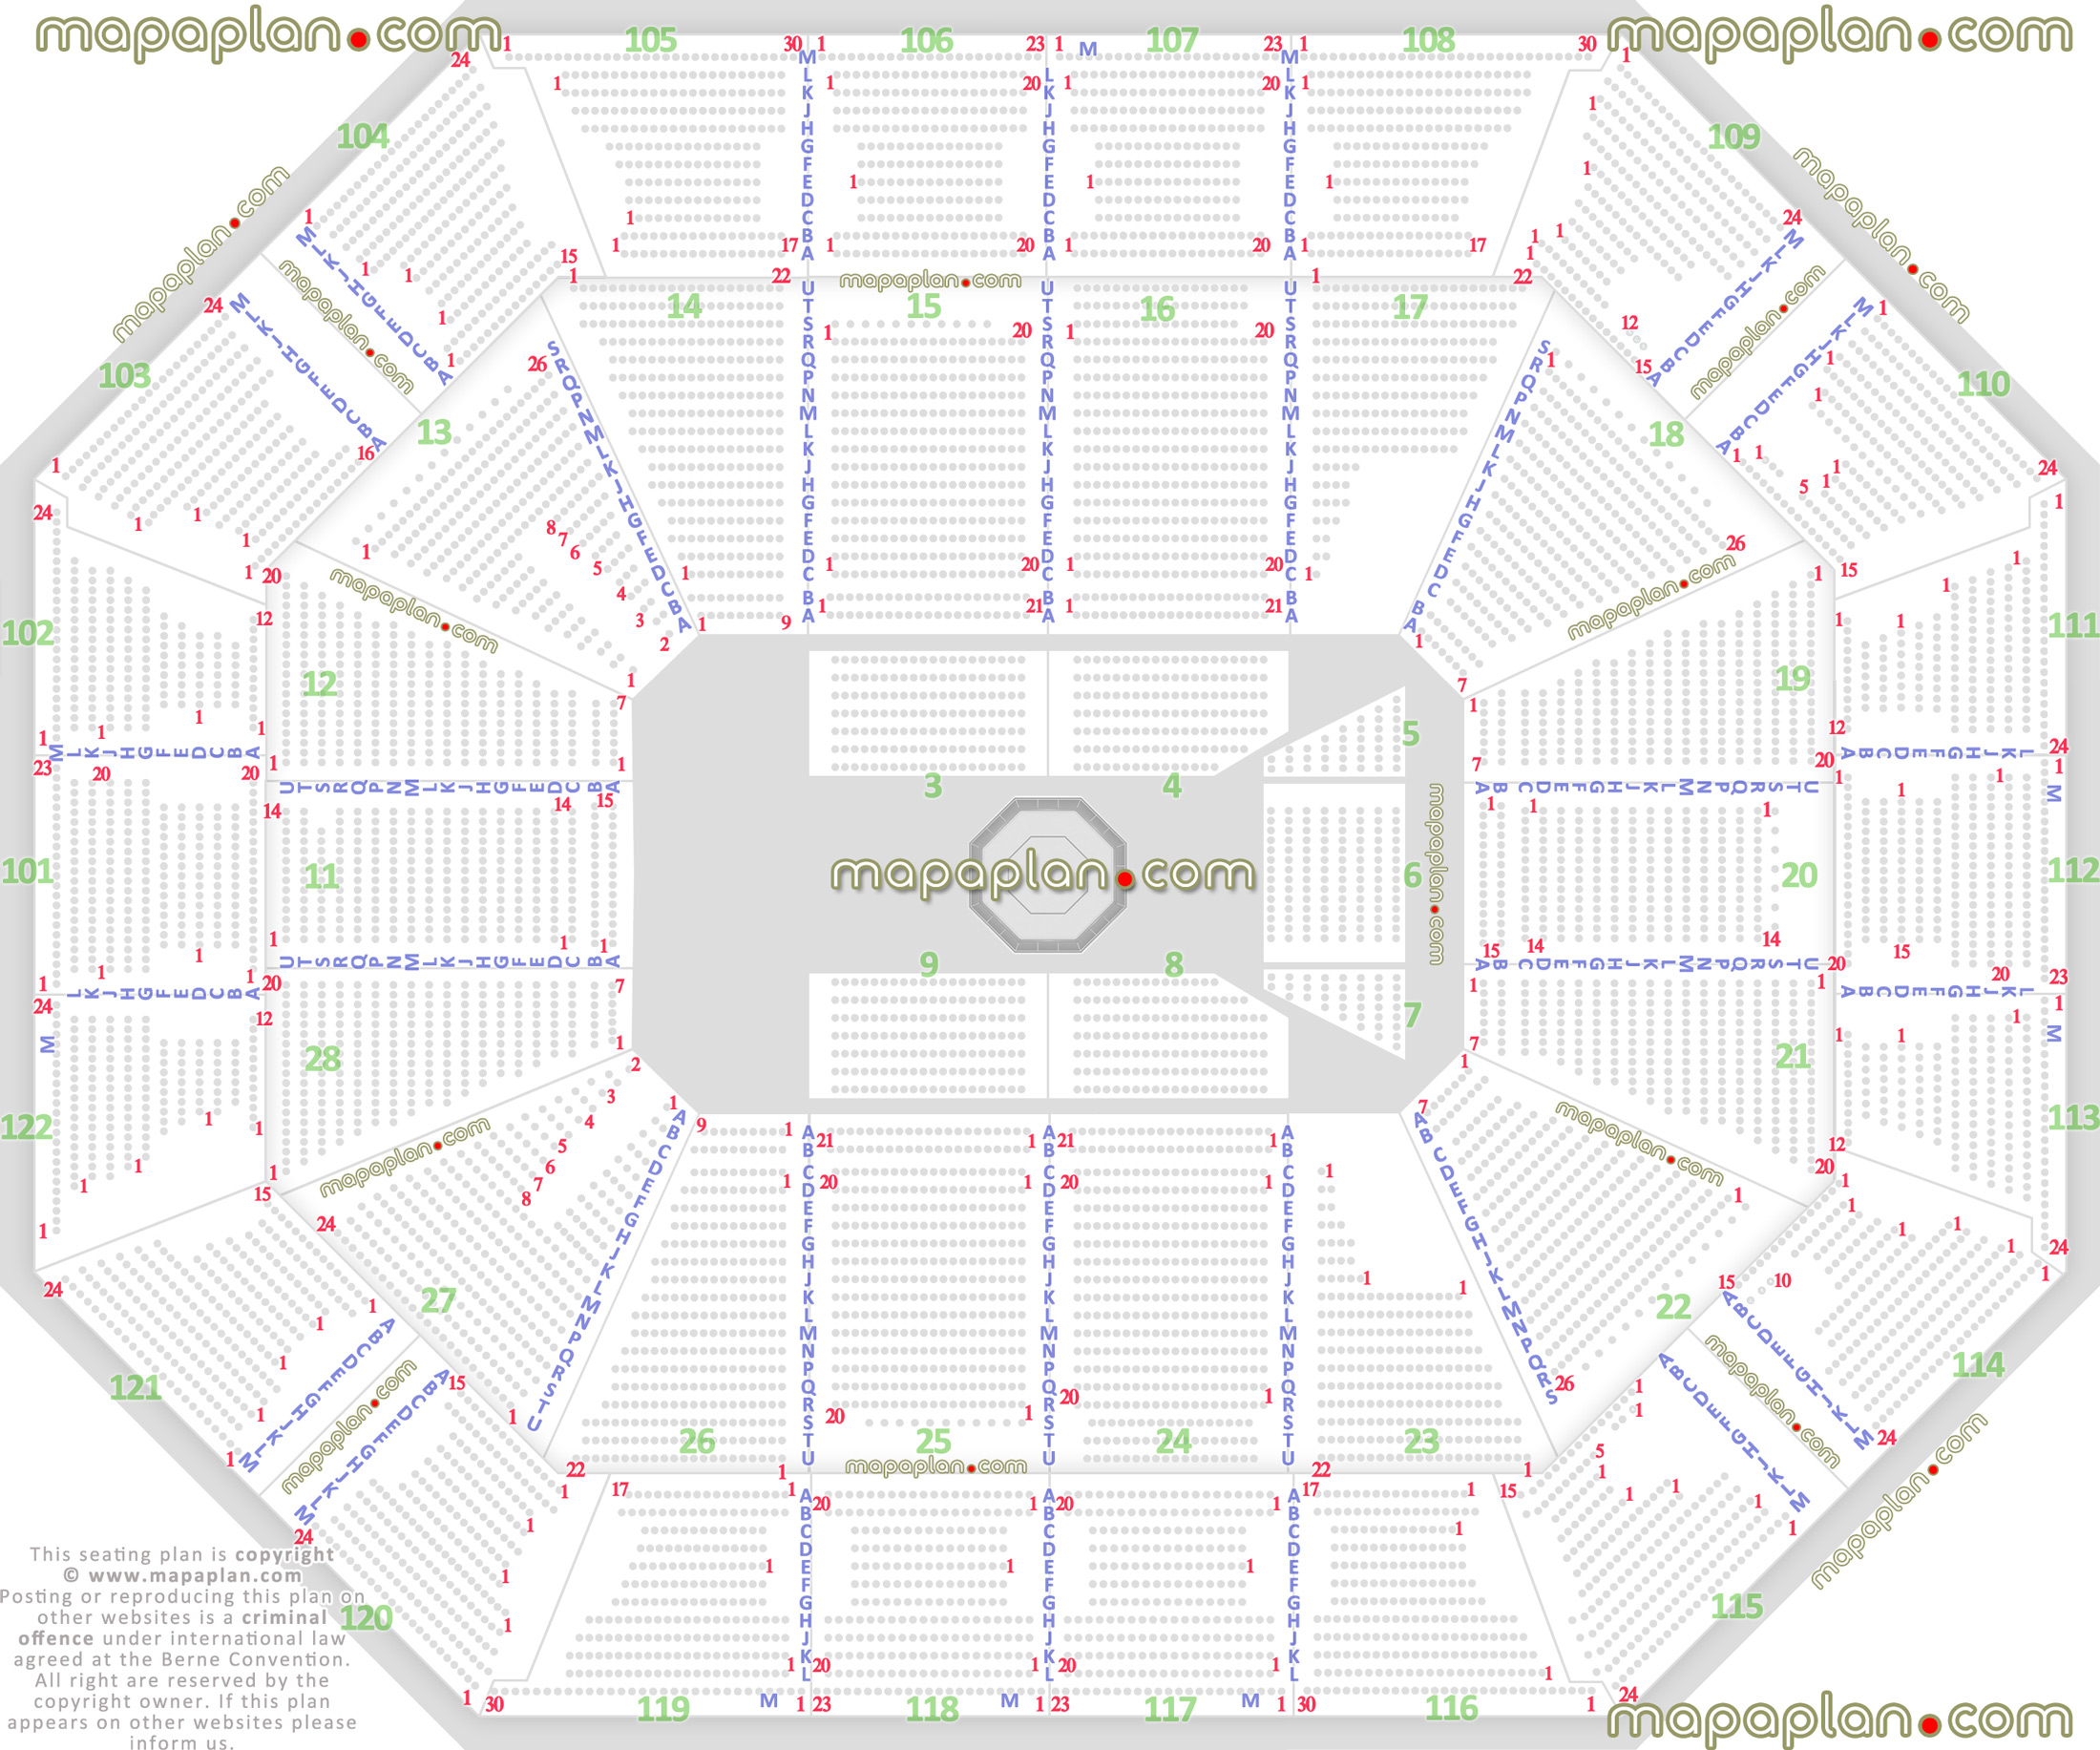 ufc mma fights boxing match events detailed fully seated chart setup viewer standing room only sro area wheelchair disabled handicap accessible seats Uncasville Mohegan Sun Arena seating chart